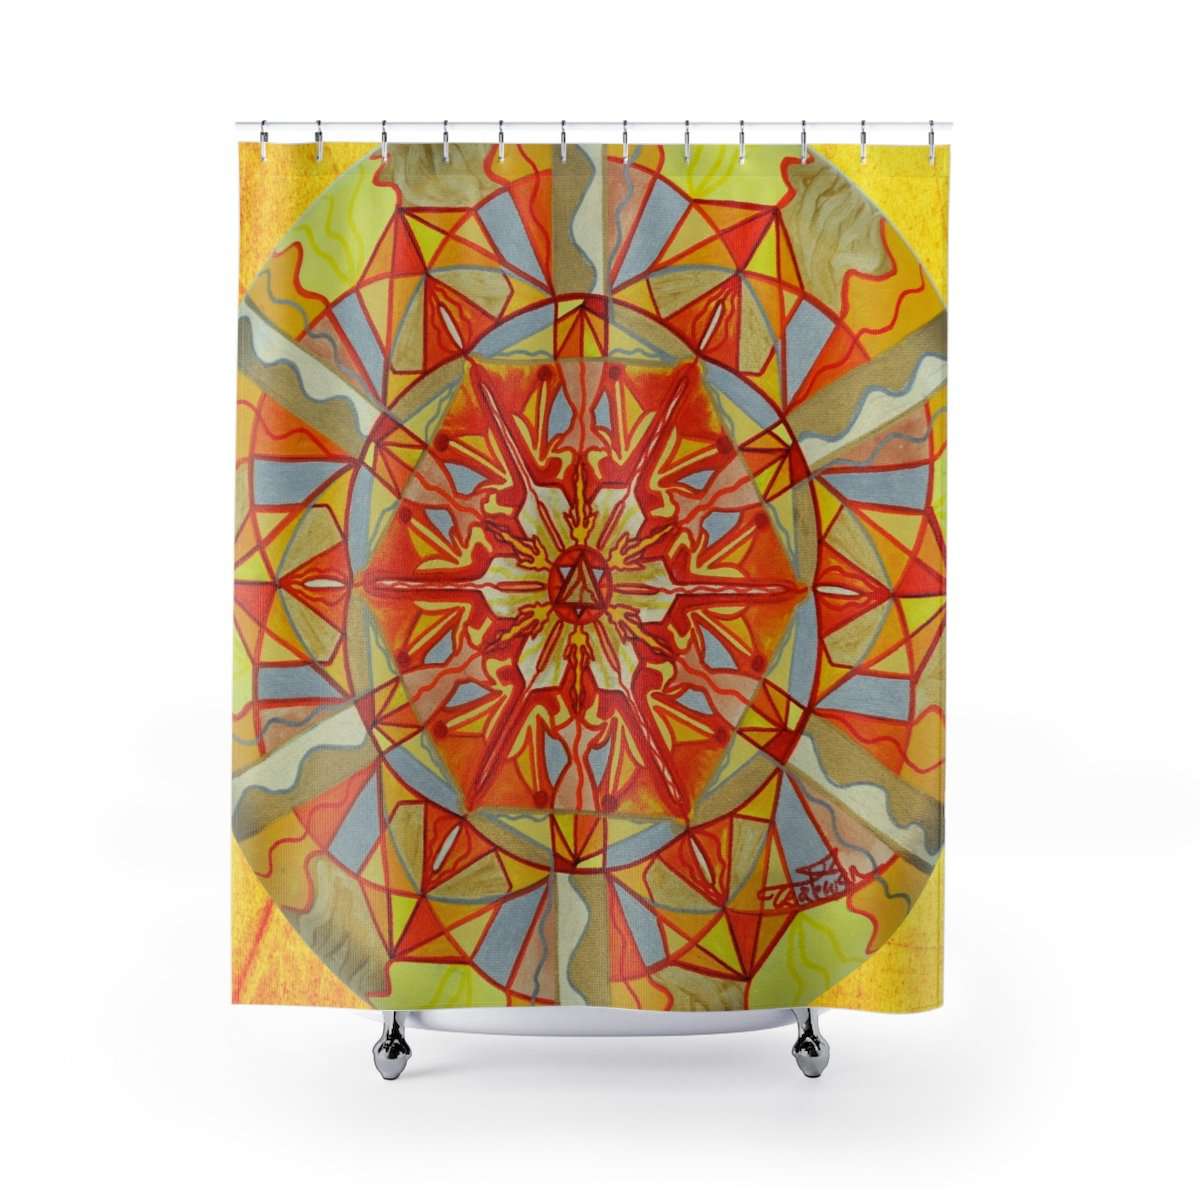 get-your-sporting-goods-of-wonder-shower-curtains-sale_0.jpg